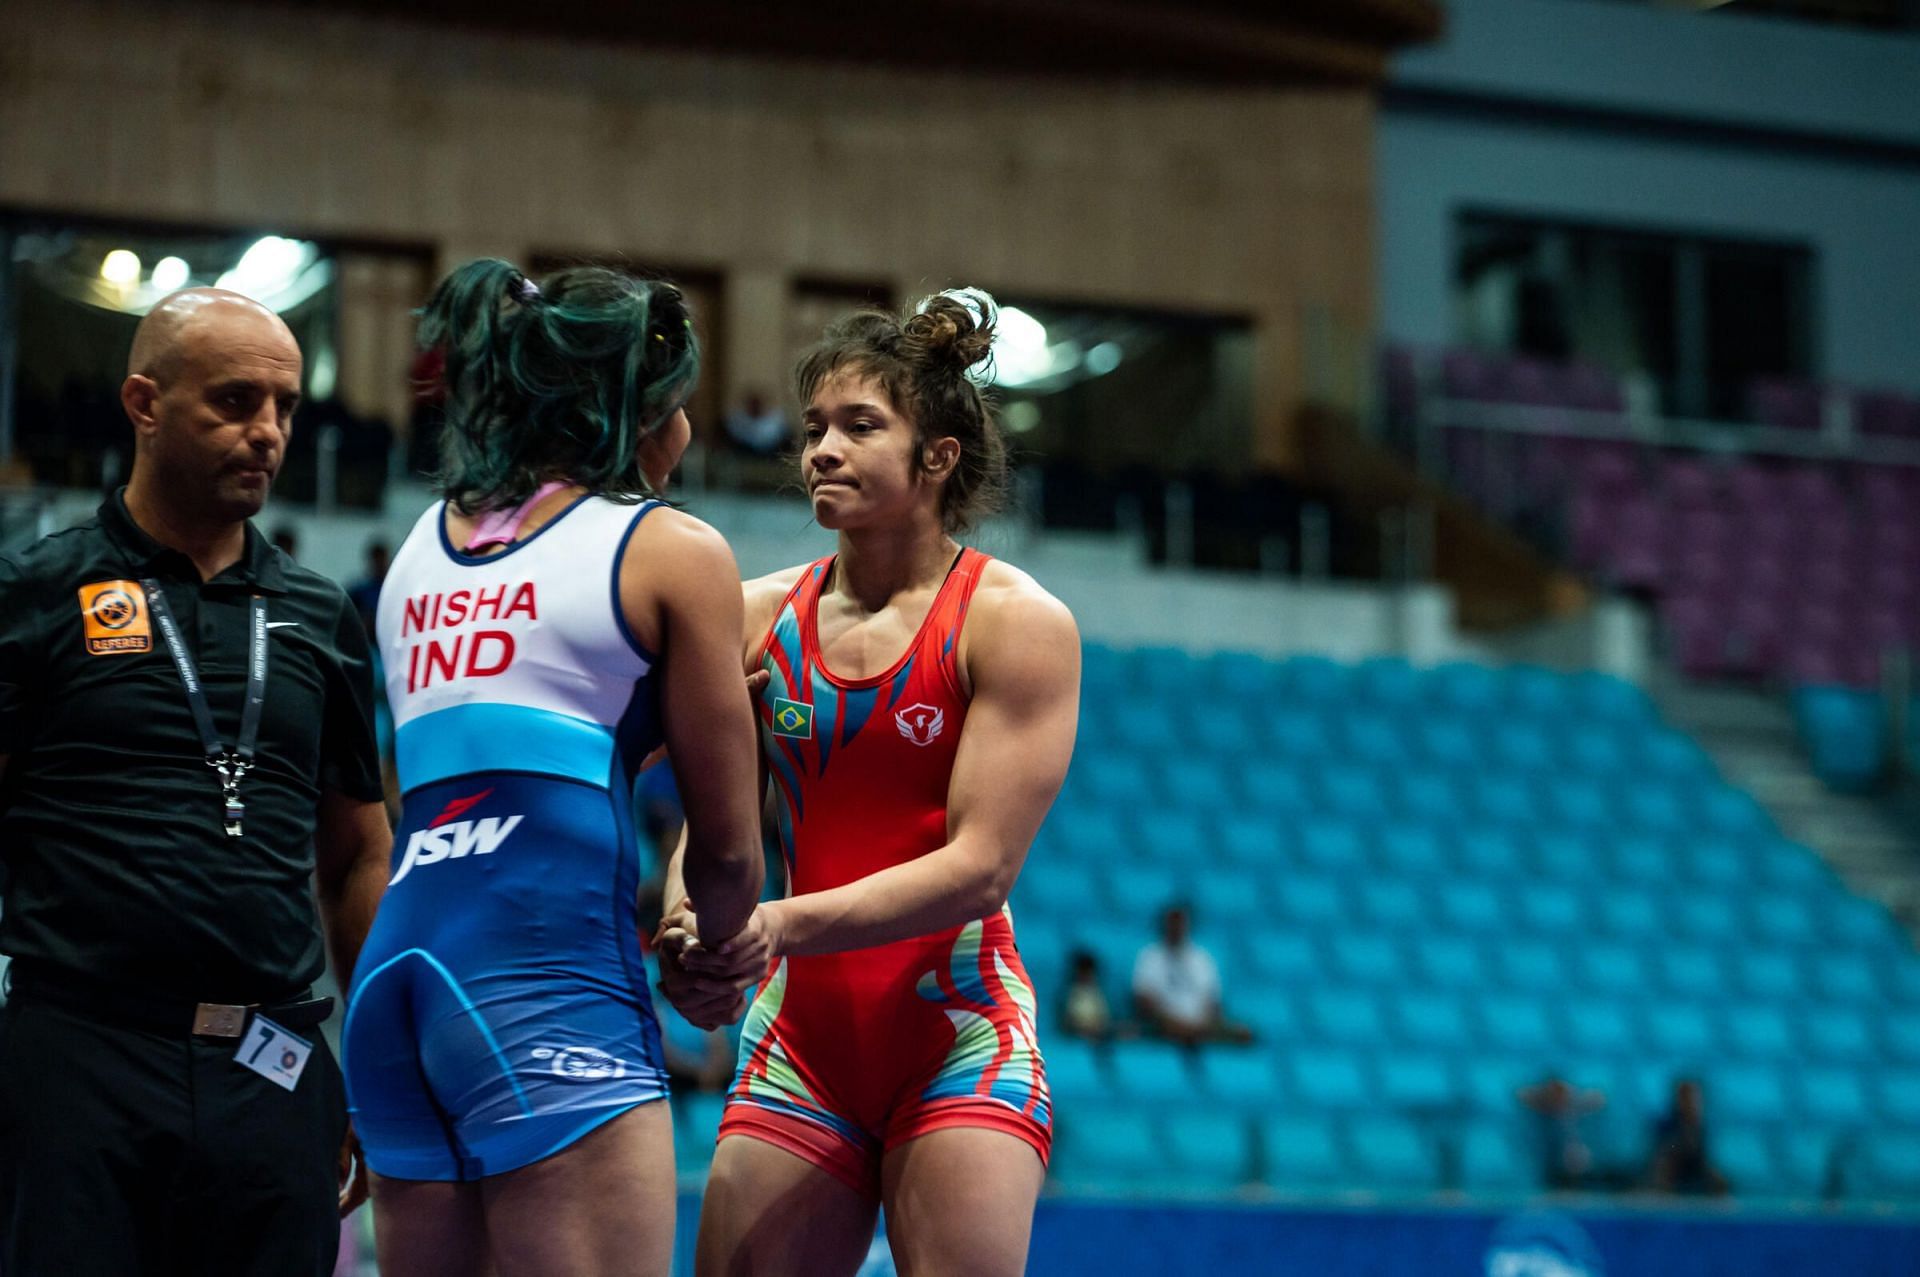 India&rsquo;s Nisha injured her knee in the bronze medal match at the Belgrade World Wrestling Championships on Thursday. Photo credit UWW